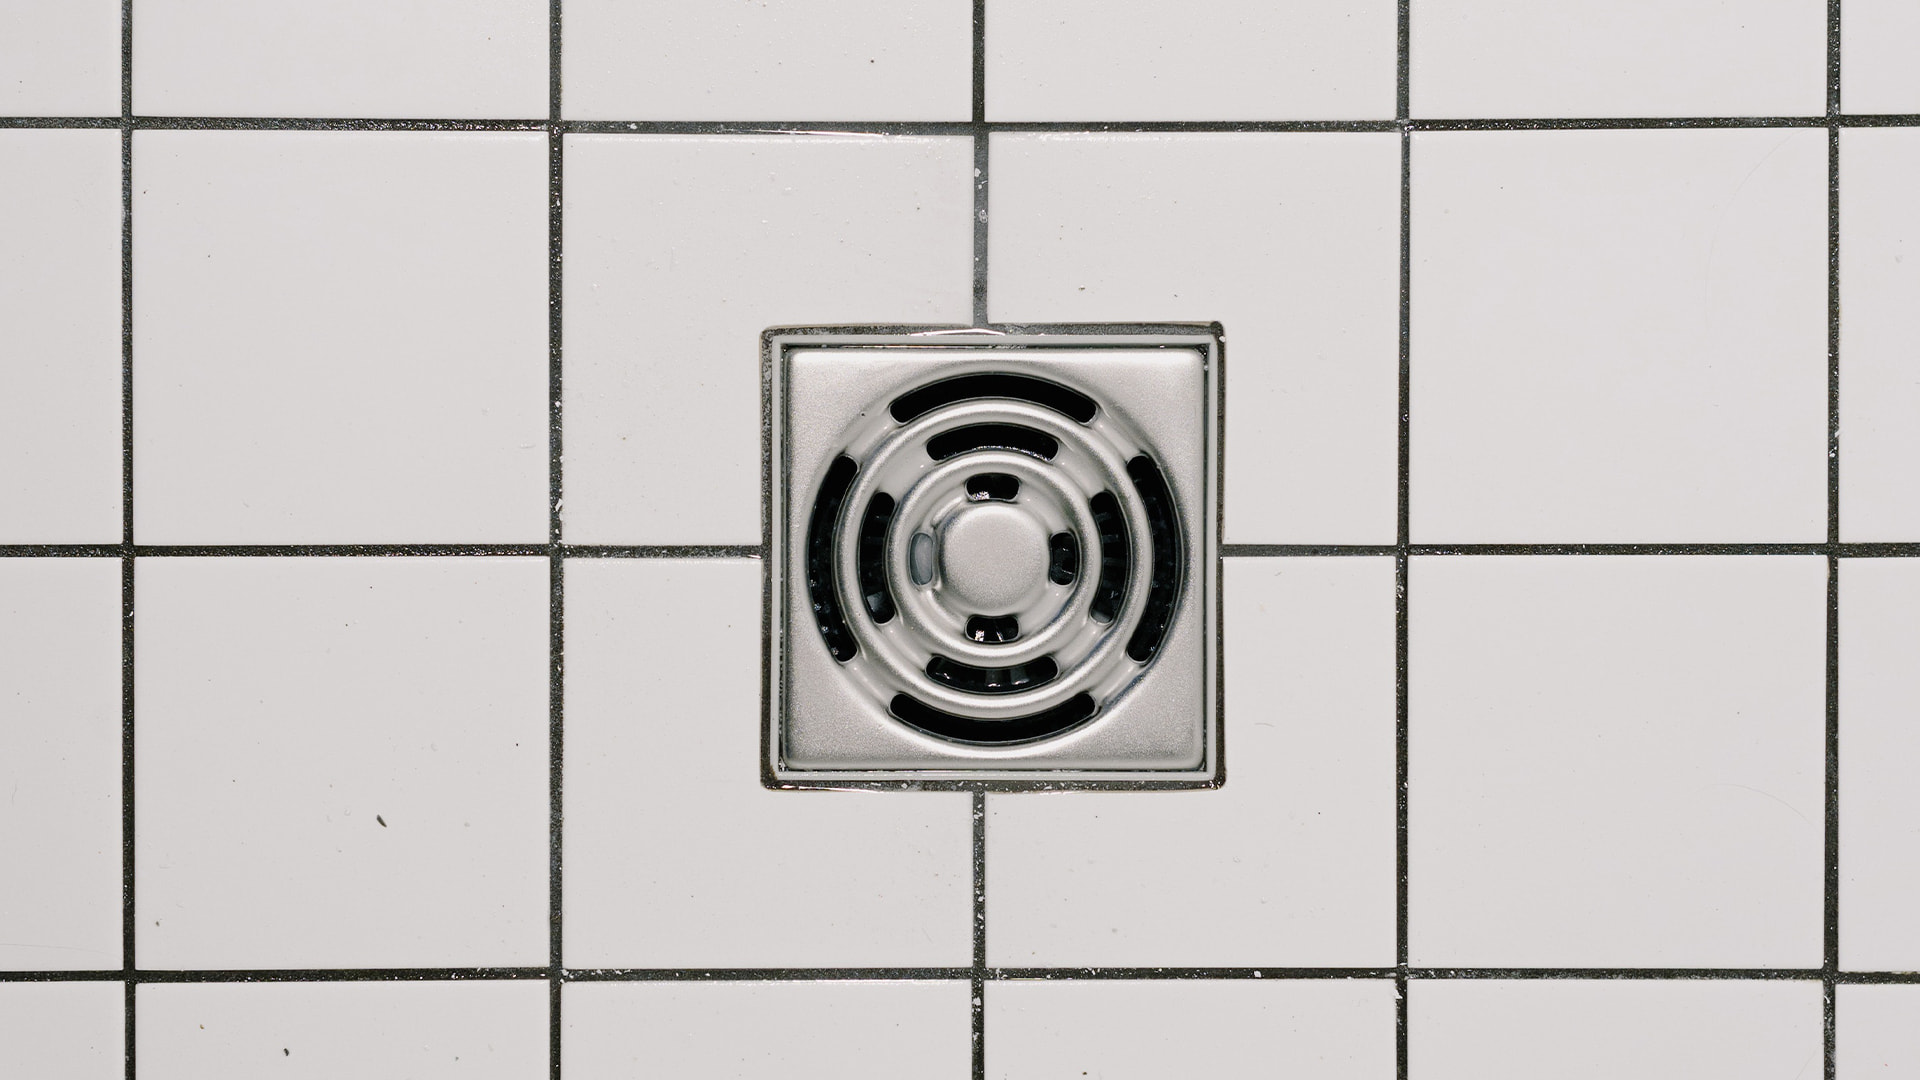 Every business owner in London knows how disruptive a blocked or poorly functioning drain can be. Not only does it lead to unsanitary conditions, but it can also lead to costly repairs if left unchecked. We're here to help you prevent that. Our team of cleaning specialists leverages industry-leading equipment and eco-friendly methods to provide comprehensive drain cleaning solutions tailored to your business needs.